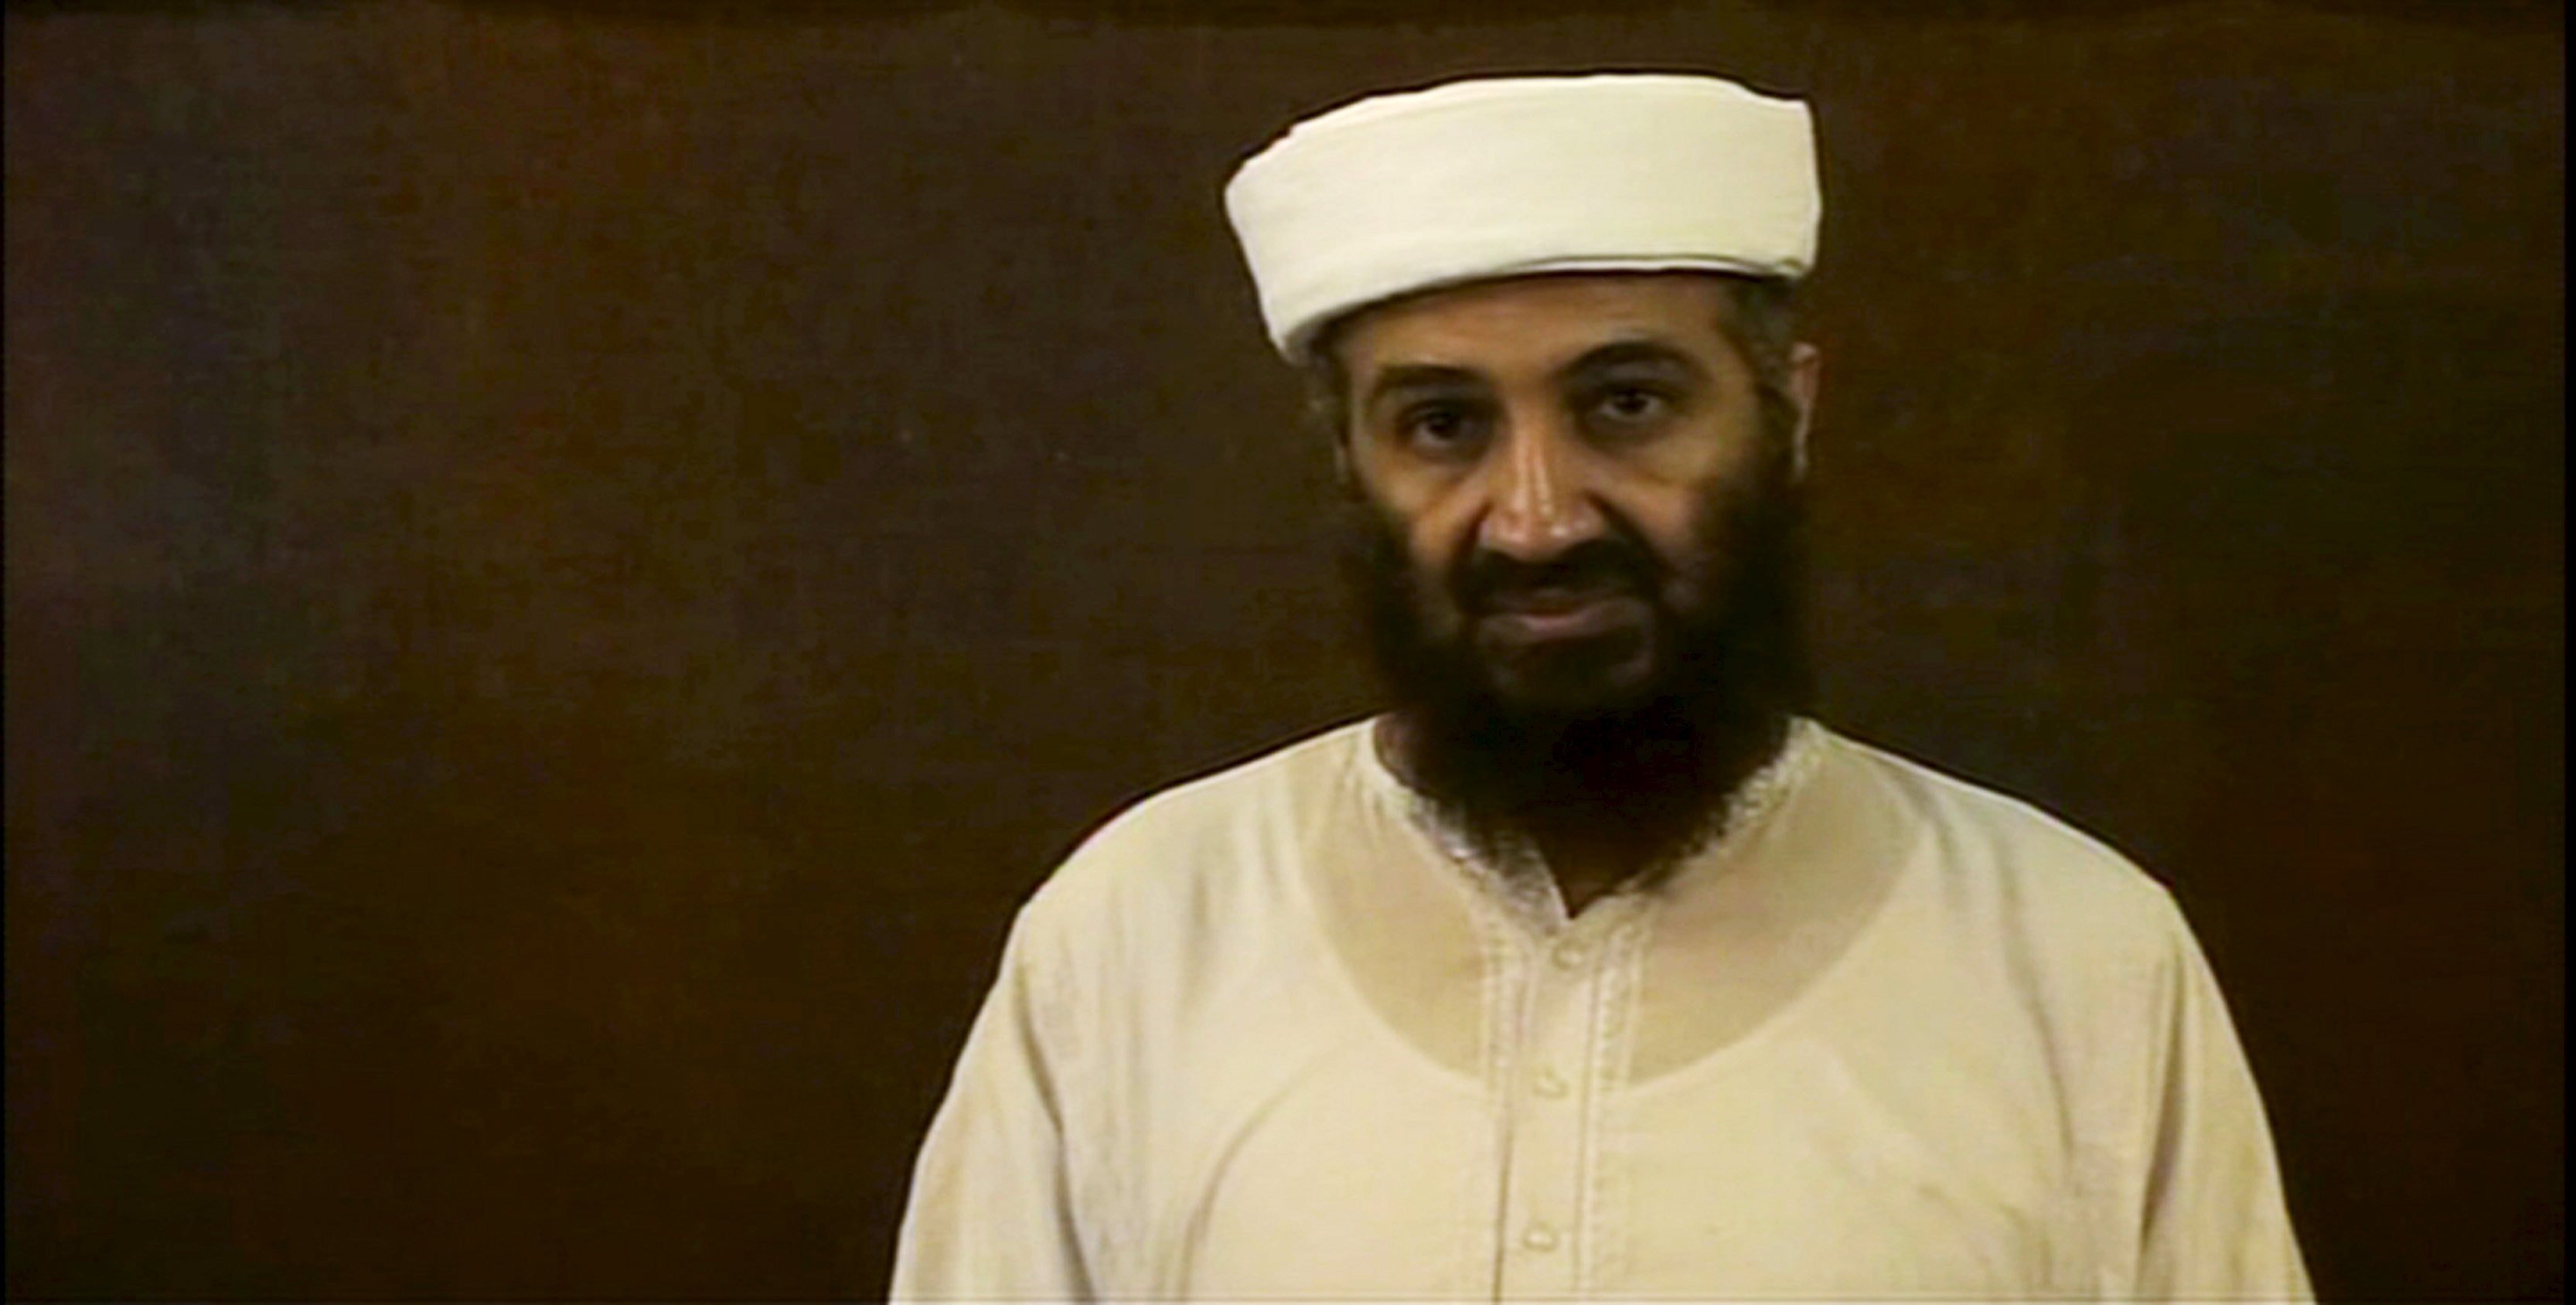 Osama bin Laden is shown in this file video frame grab released by the U.S. Pentagon on May 7, 2011. (Reuters)